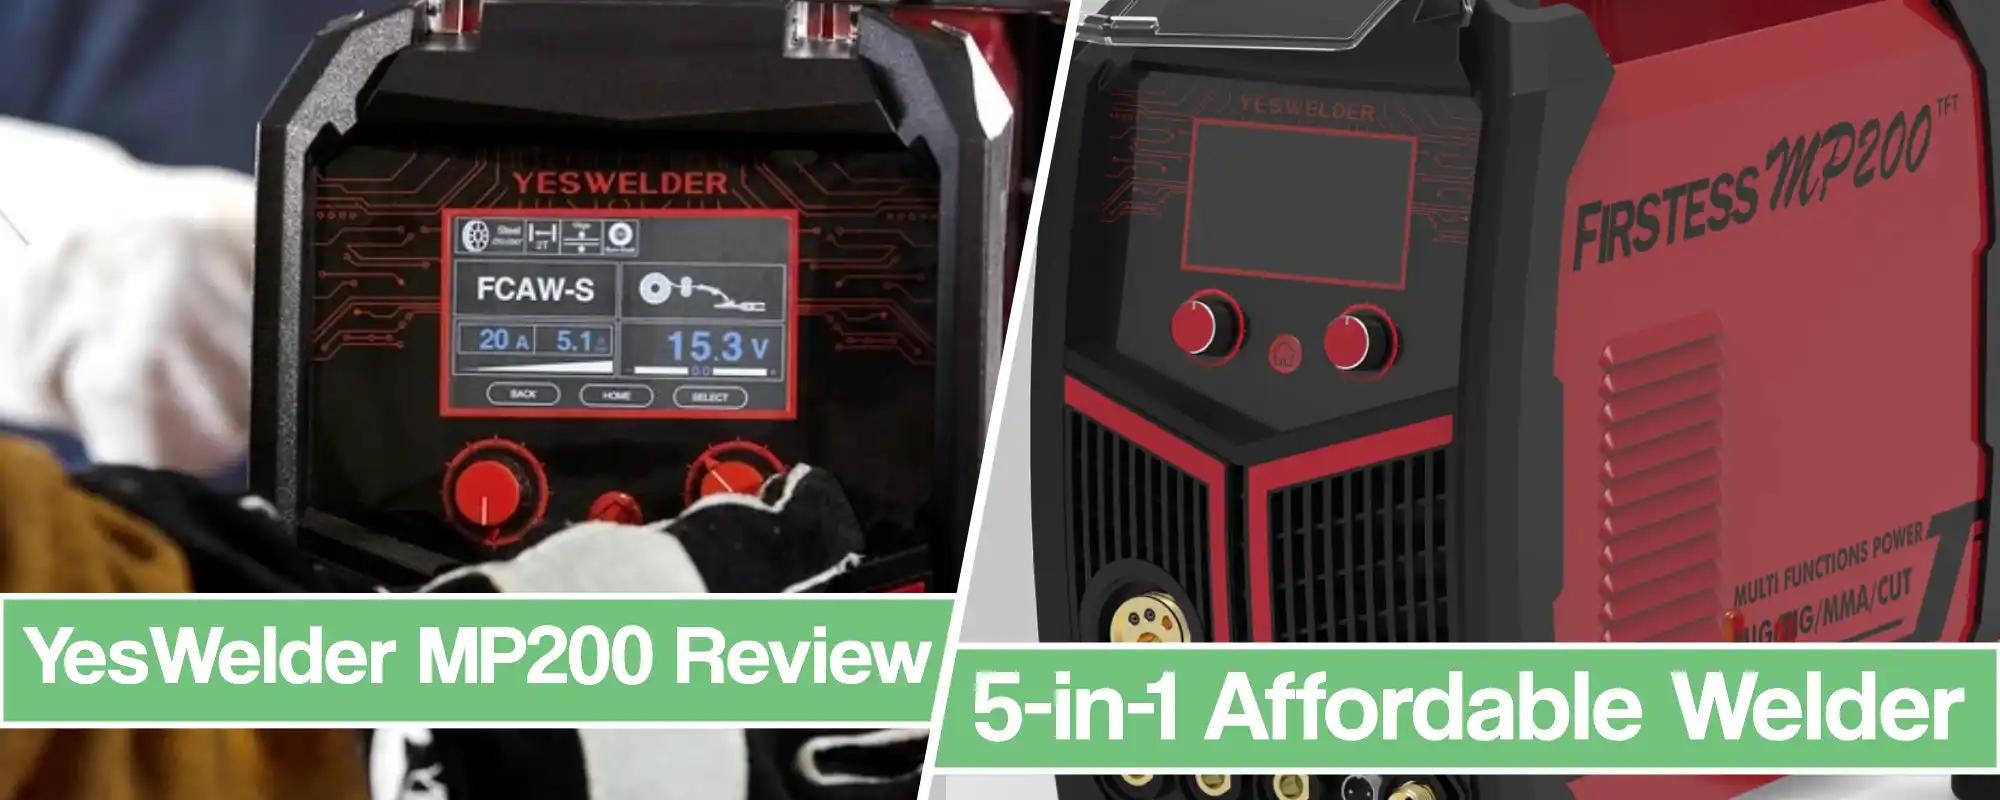 YesWelder MP200 Review – Detailed Overview of this fantastic 5 in 1 multi-process Welder